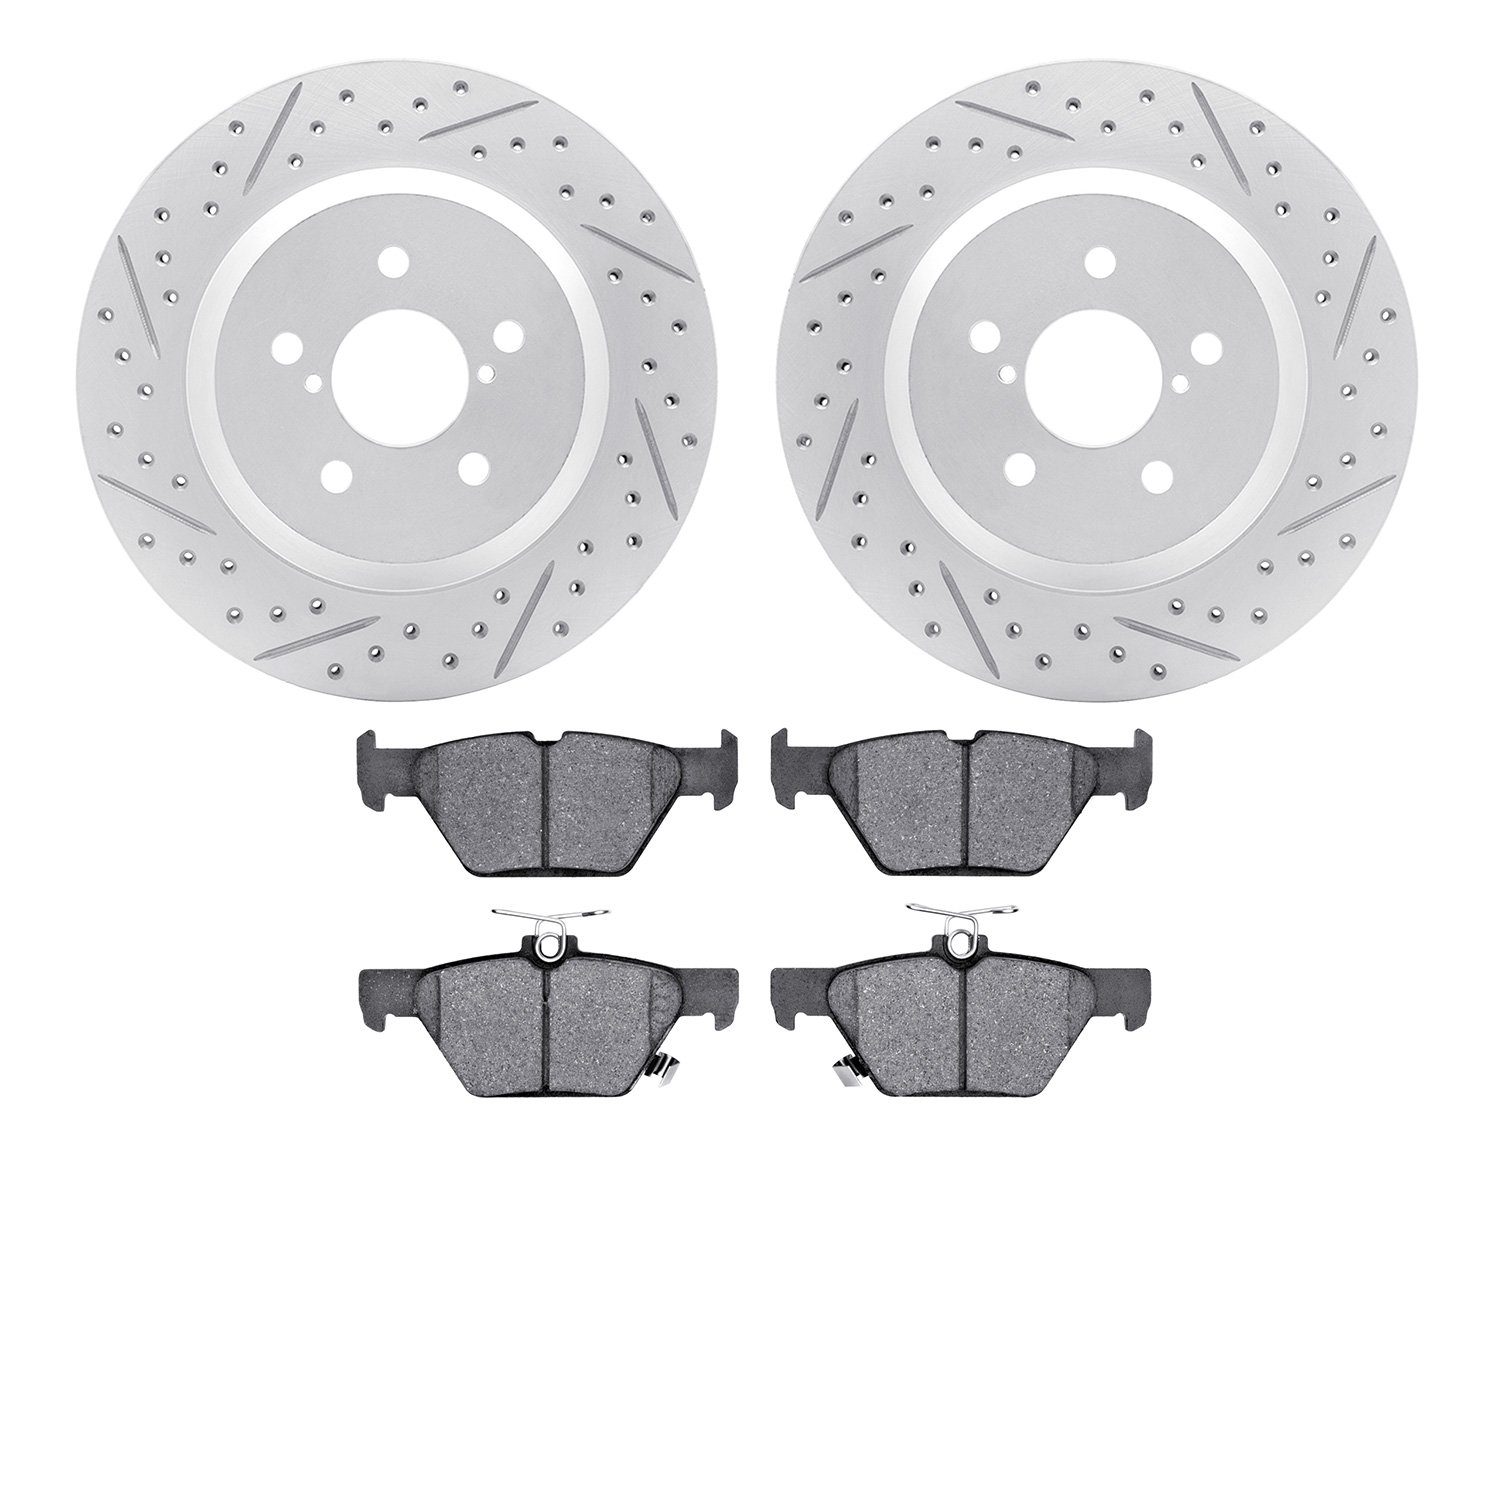 2502-13047 Geoperformance Drilled/Slotted Rotors w/5000 Advanced Brake Pads Kit, Fits Select Subaru, Position: Rear